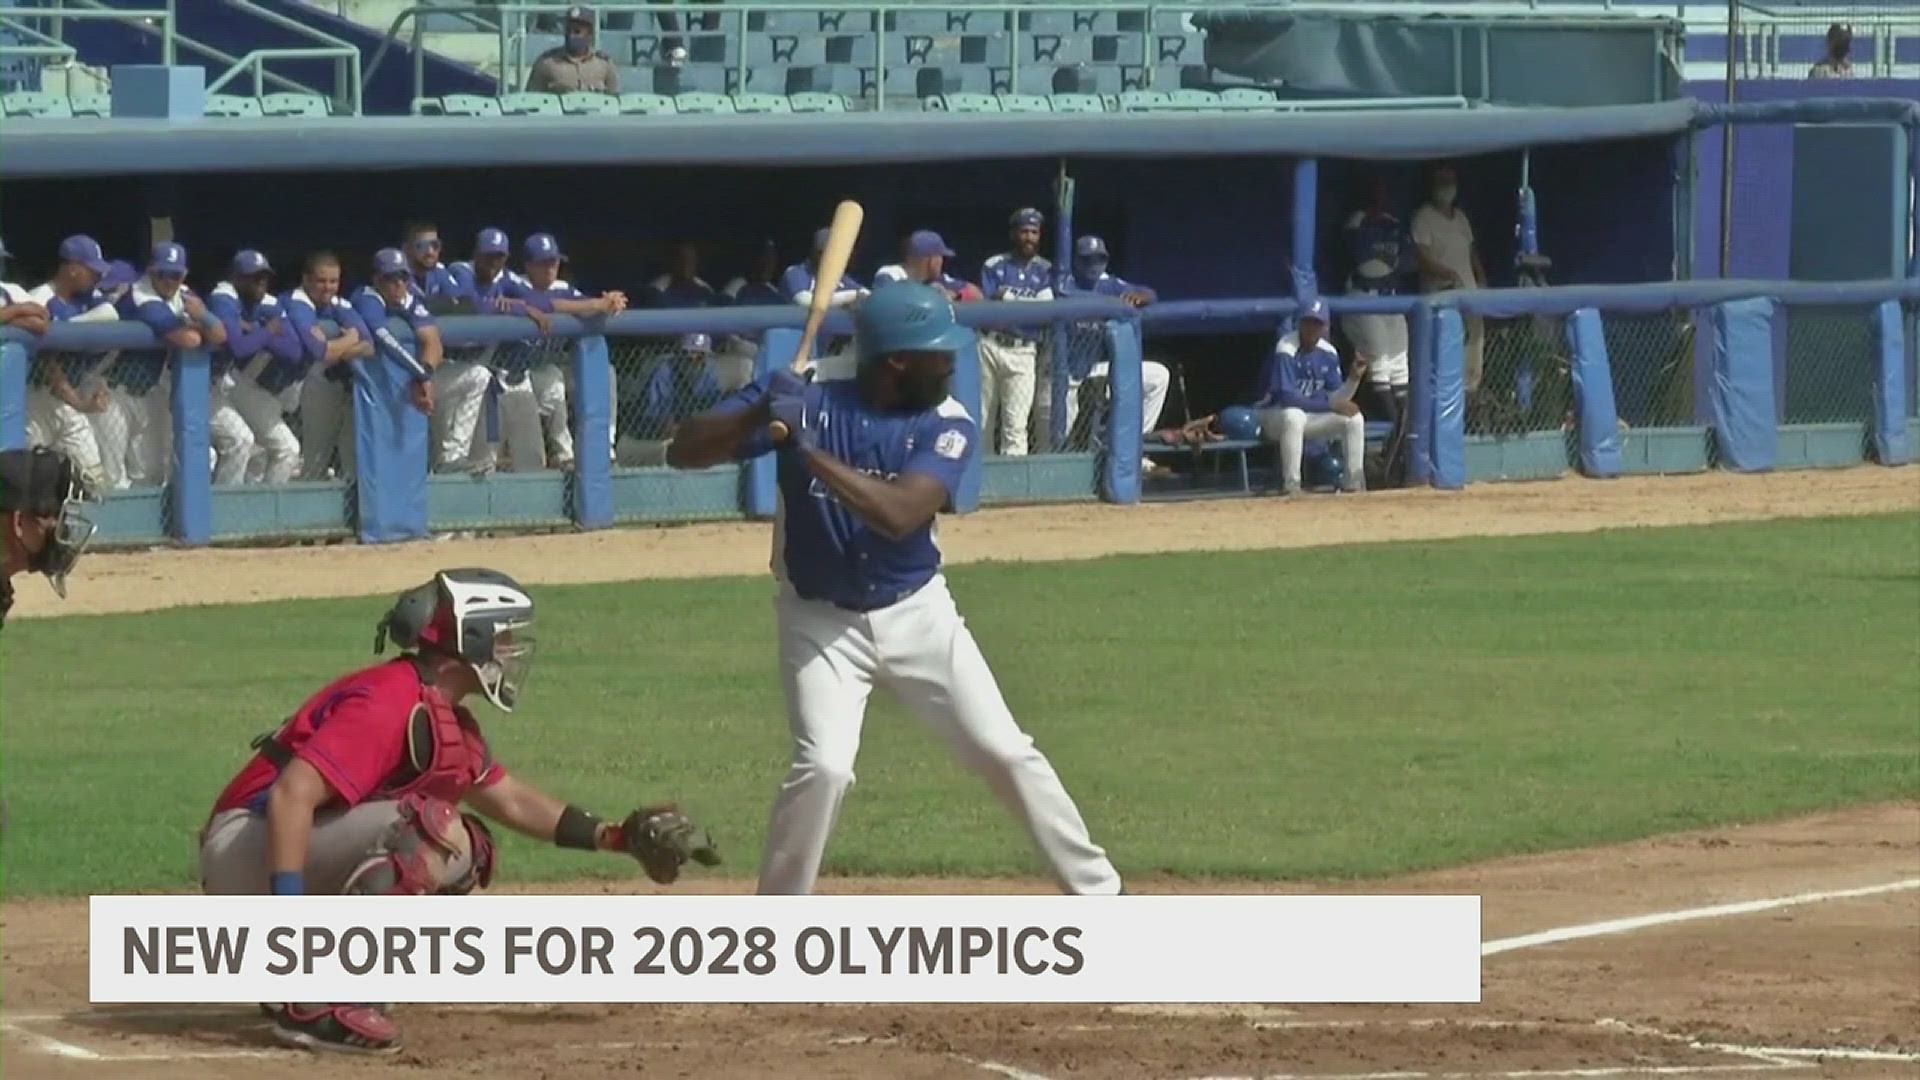 This week a new report reveals the 2028 Los Angeles Olympics may include -- cricket, lacrosse, baseball, softball and flag football.